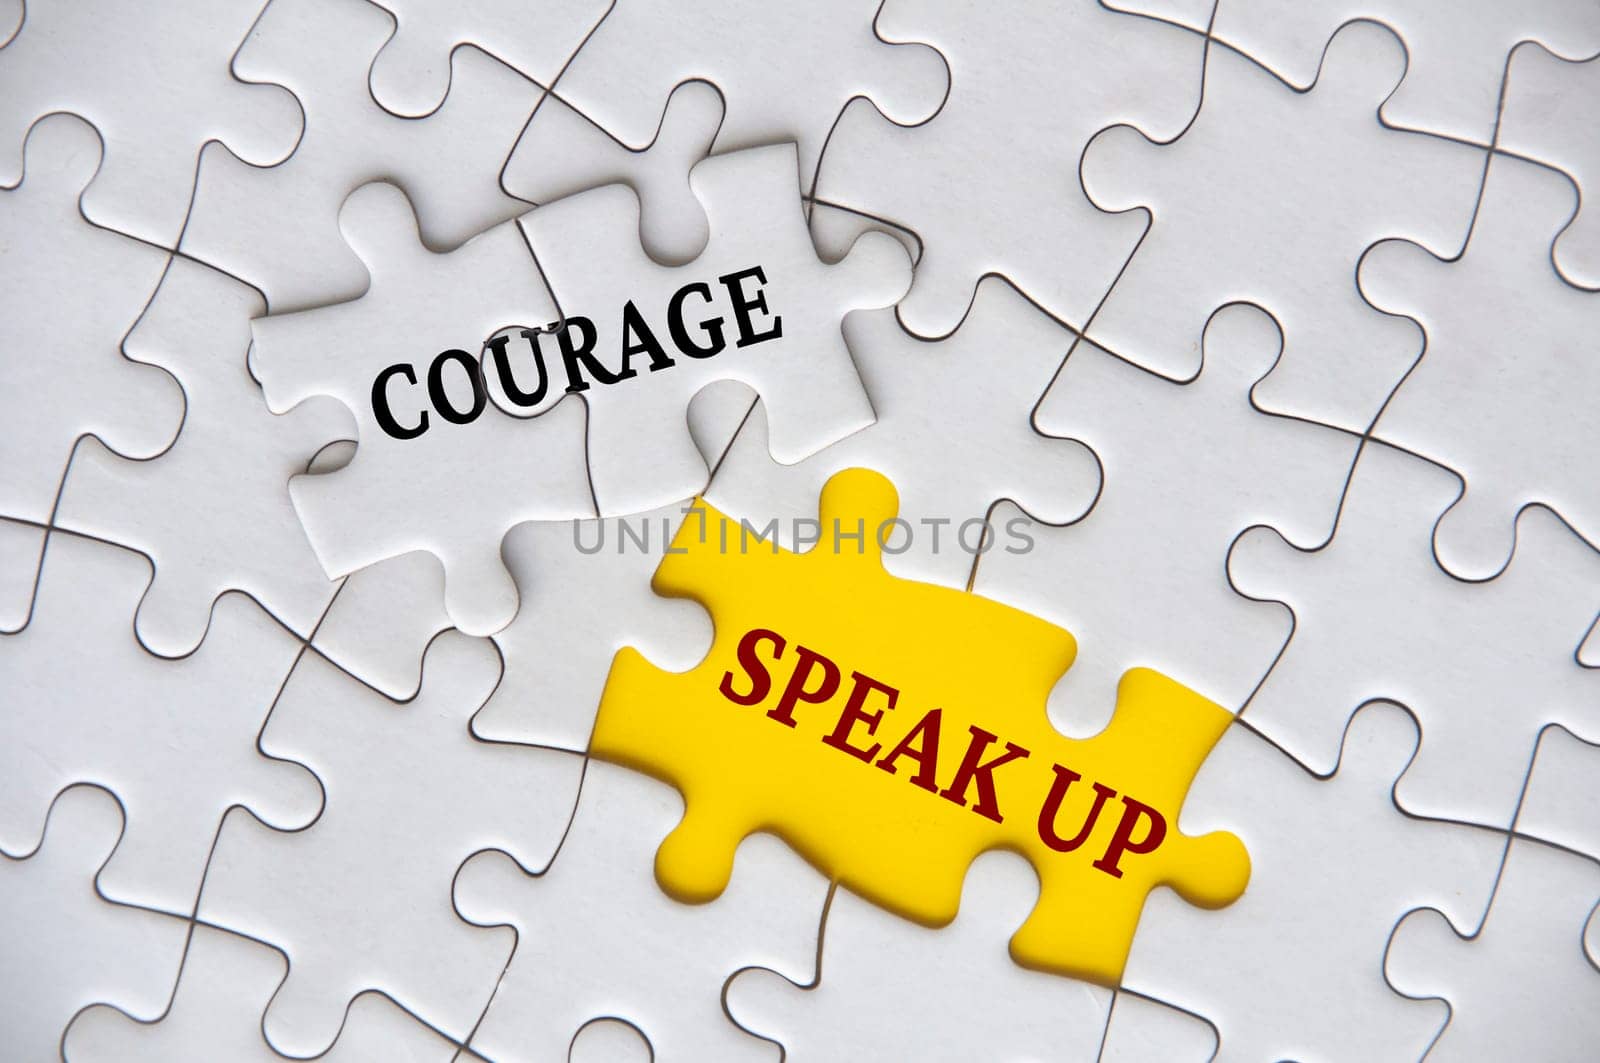 Courage to speak up text on missing jigsaw puzzle representing business culture in exercising speak up. by yom98